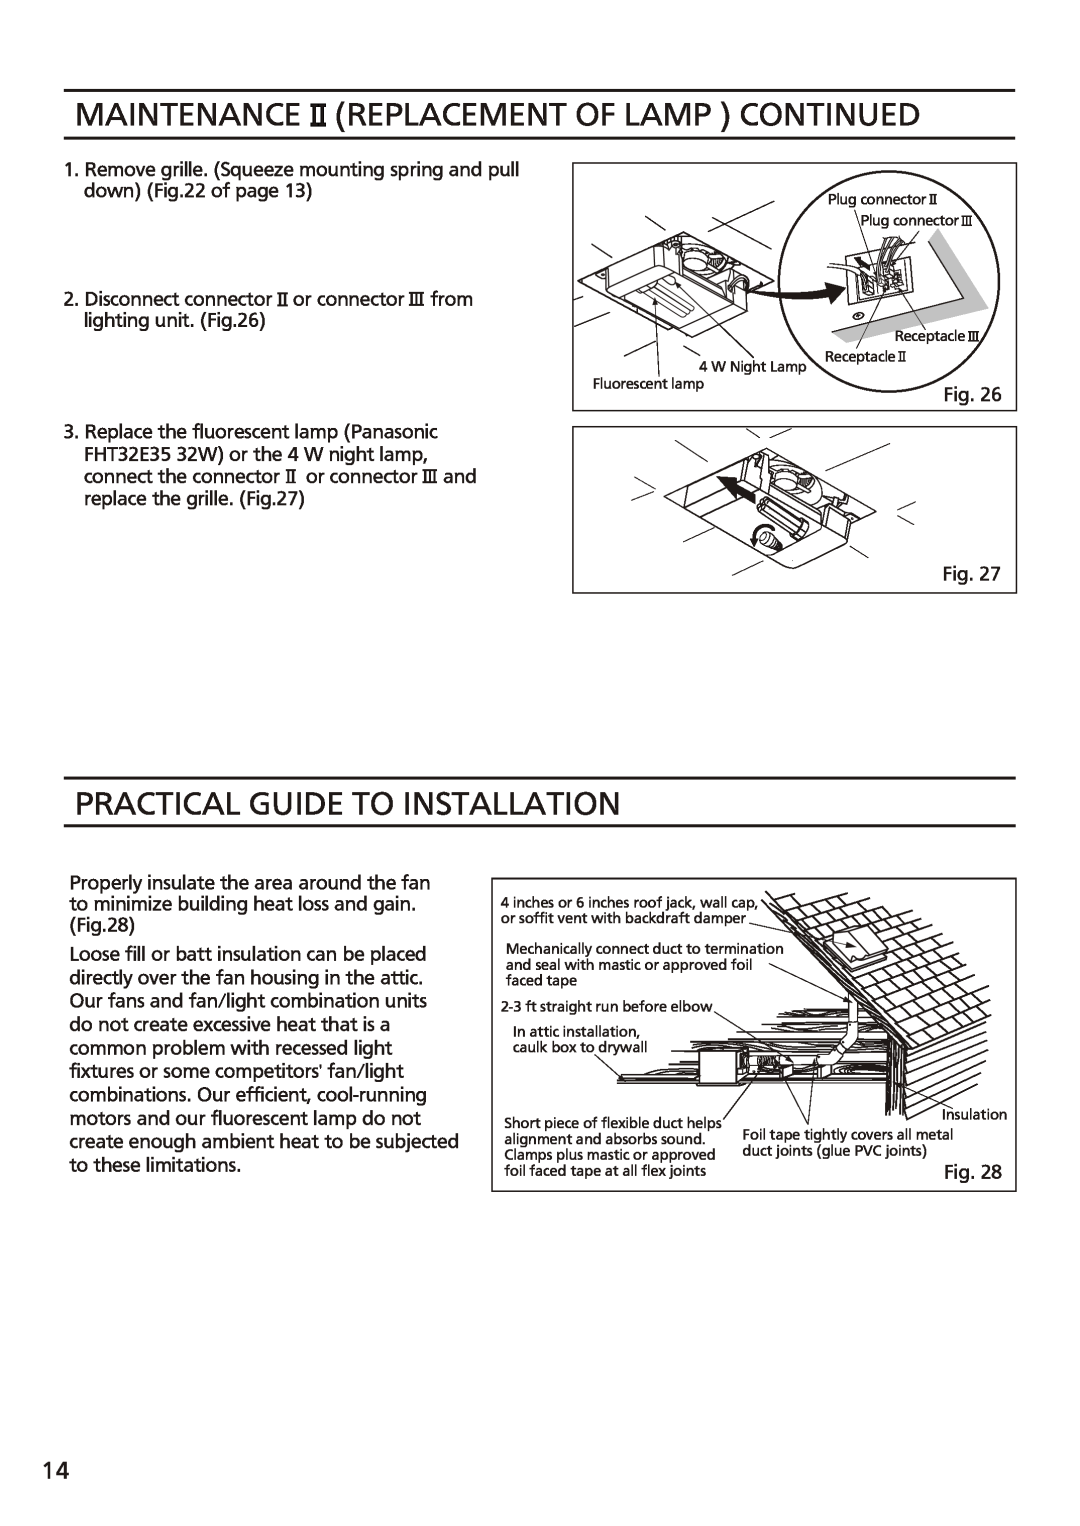 Panasonic FV-08vsl2 installation instructions Maintenance Replacement Of Lamp Continued, Practical Guide To Installation 